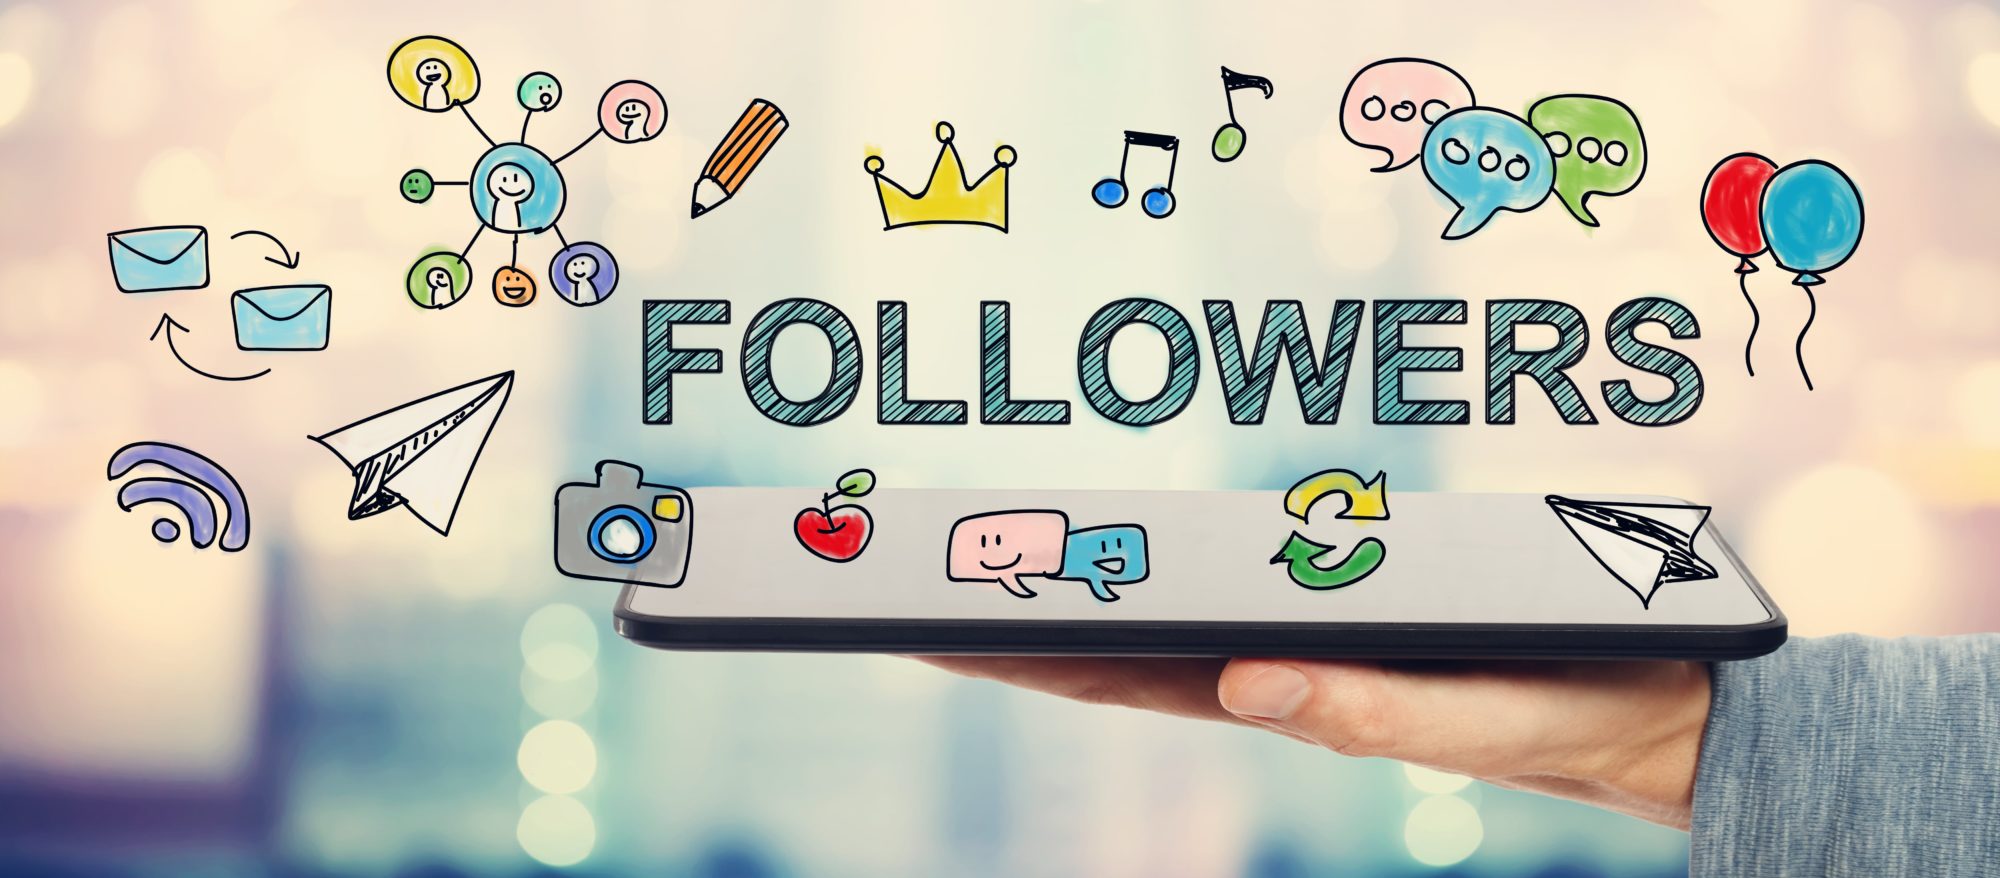 Social Media Platforms Need To Do More When It Comes To Fake Followers